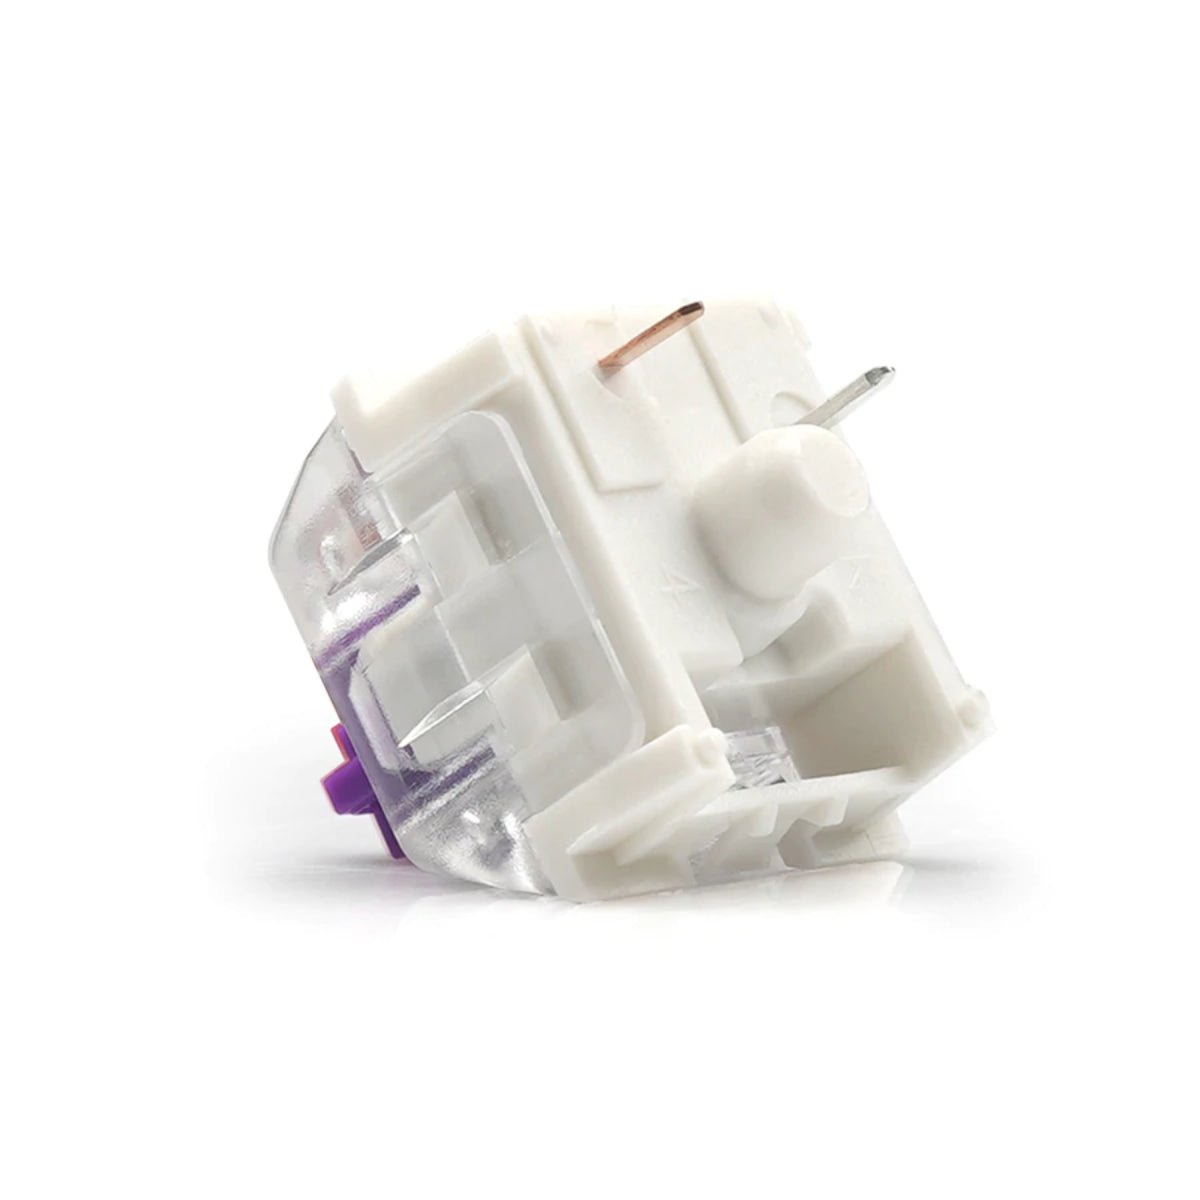 KBD Fans Kailh Pro Tactile Switches - Purple - Store 974 | ستور ٩٧٤